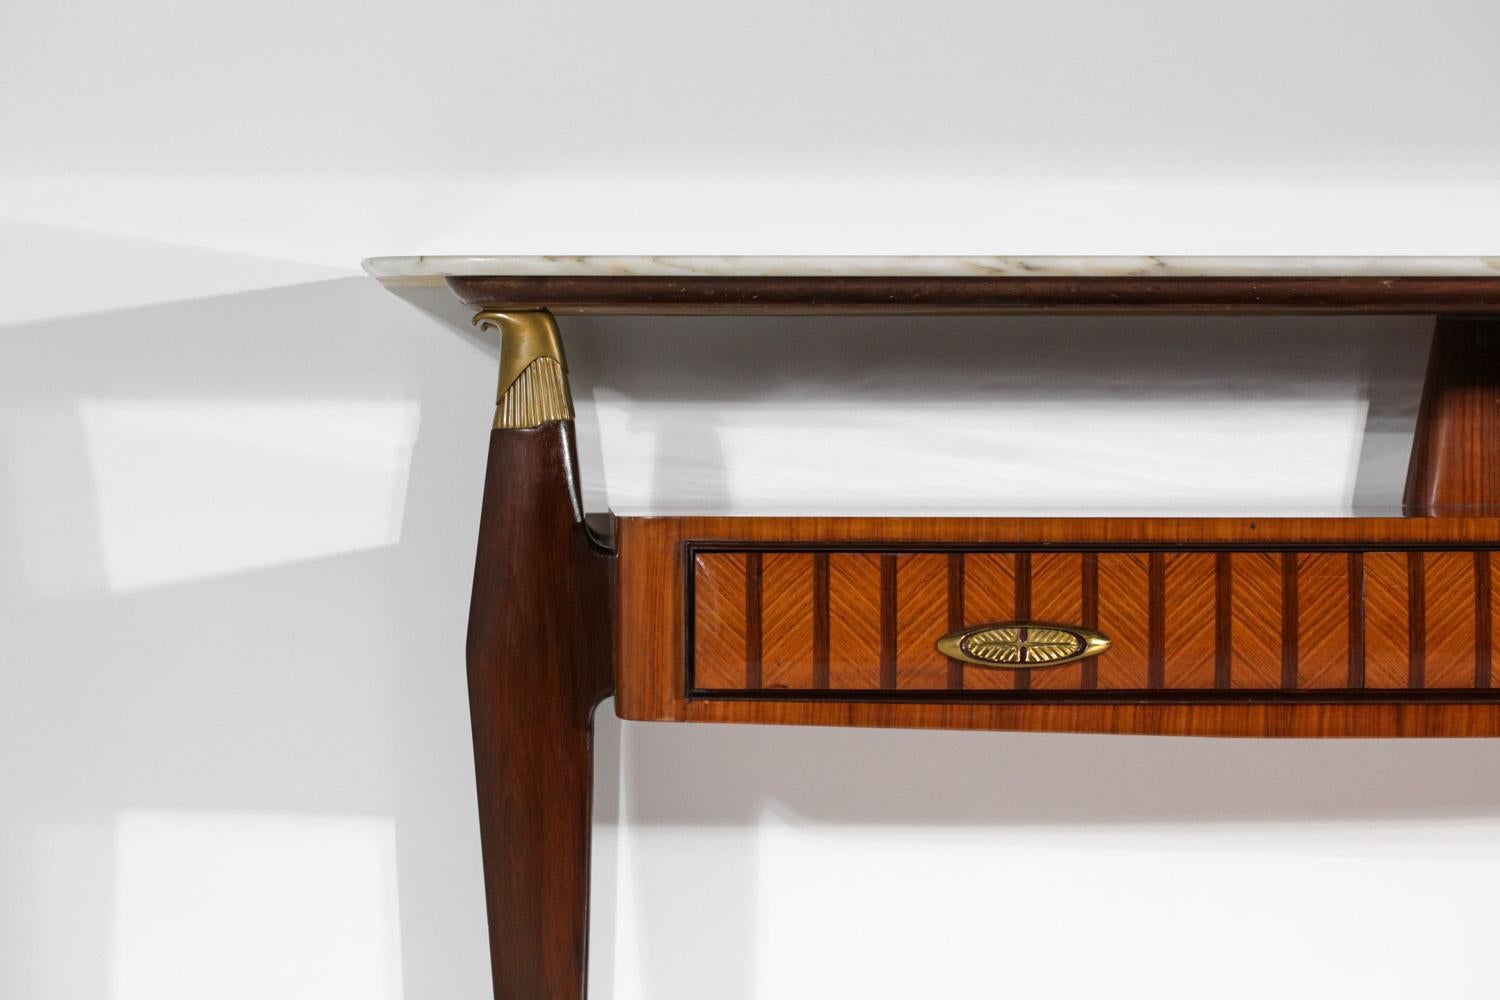 Elegant Italian console from the 1960s in the style of the work of Paolo Buffa. Solid wood and veneer structure with a nice marquetry work on the three drawers. Marble top supported by feet overhung by stylized eagle heads. Handles and base in solid